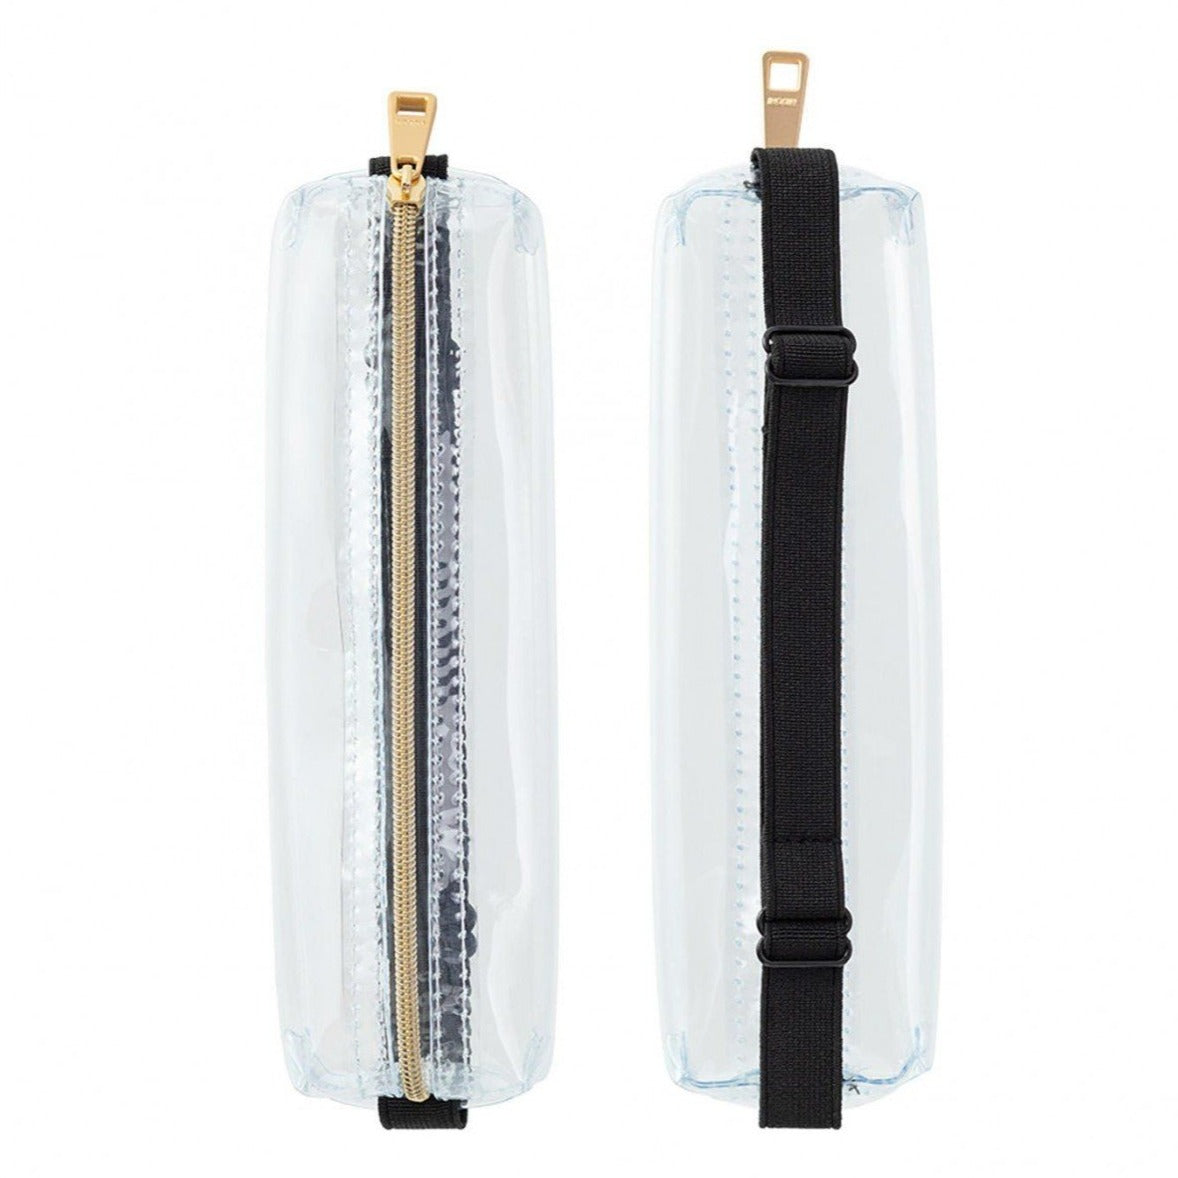 Midori Clear Book Band Pen Case back and front view - Paper Kooka Australia